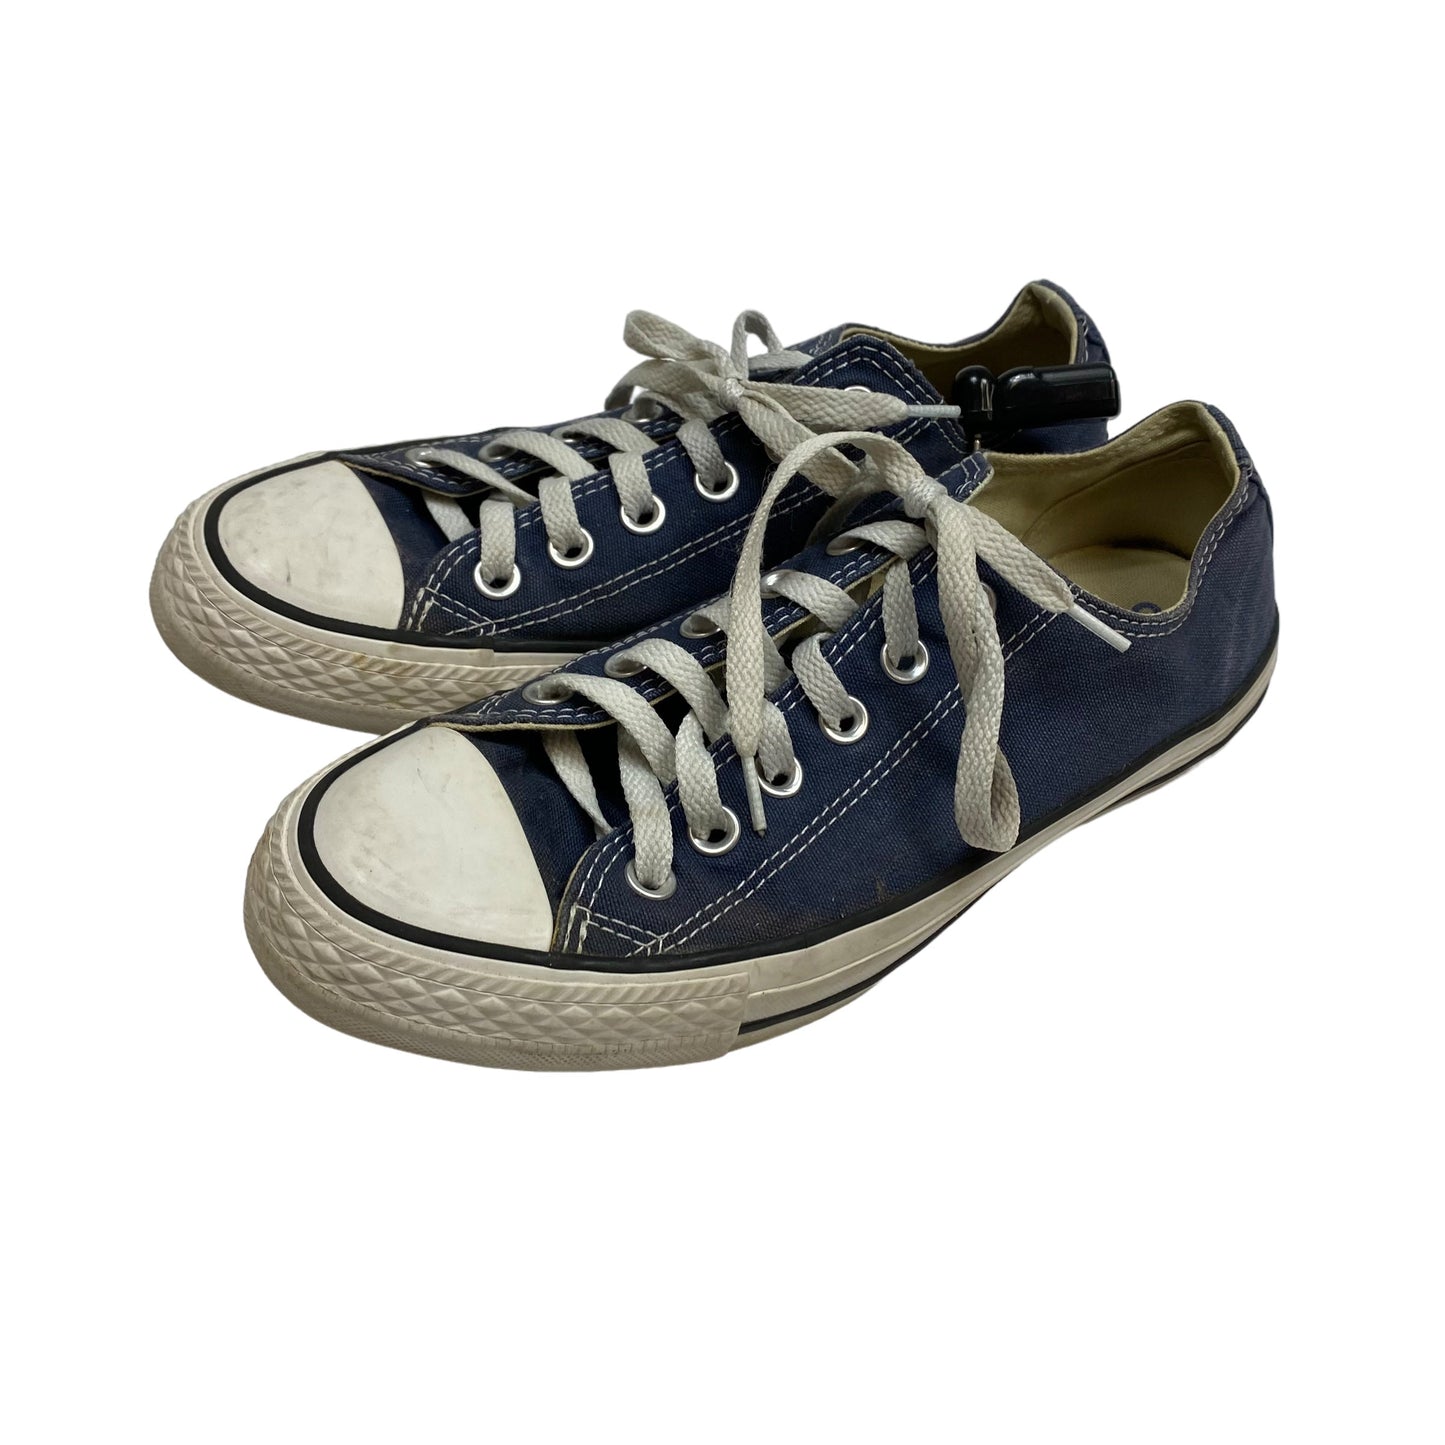 Blue Shoes Sneakers Converse, Size 8